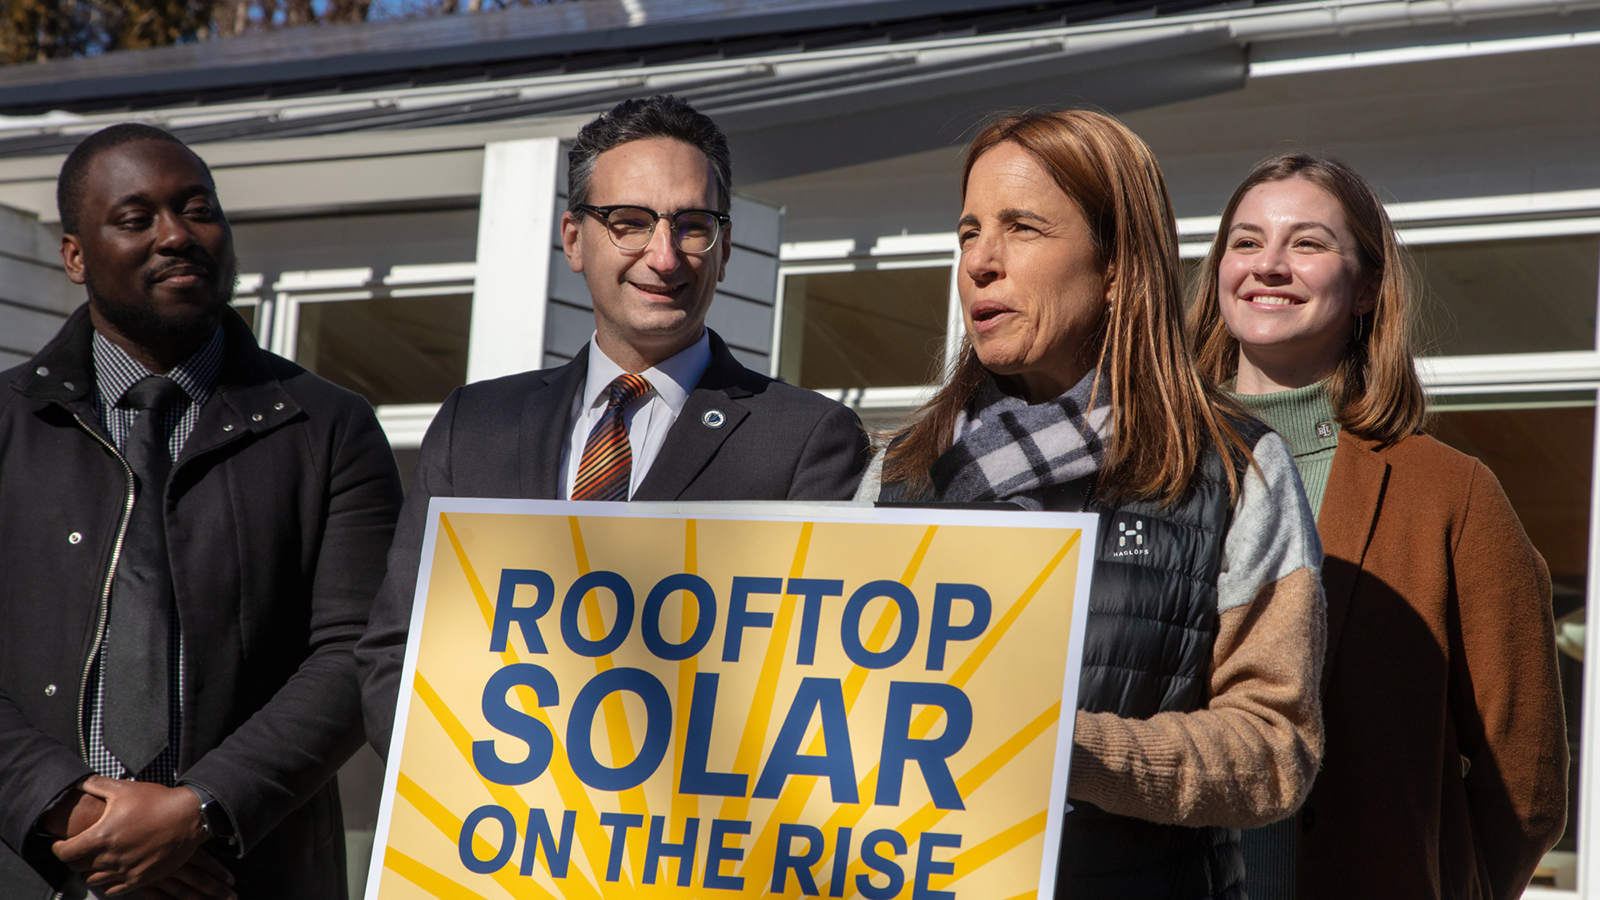 Environment Massachusetts member Sylvia Kuzman joined us for the “Rooftop Solar is on the Rise” release.